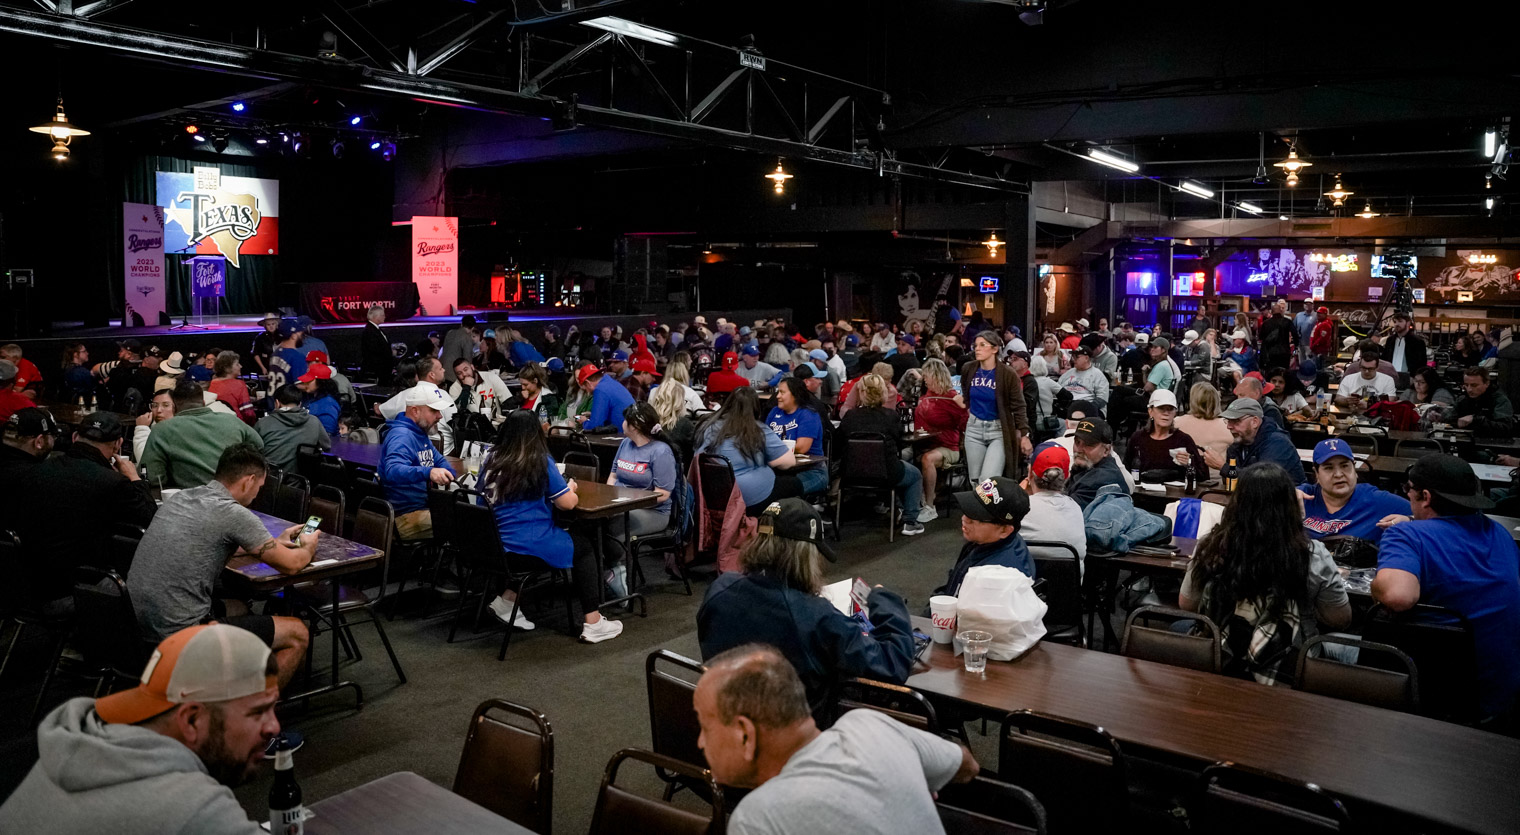 A wide shot of over a hundred people sittign at tables in front of a stage